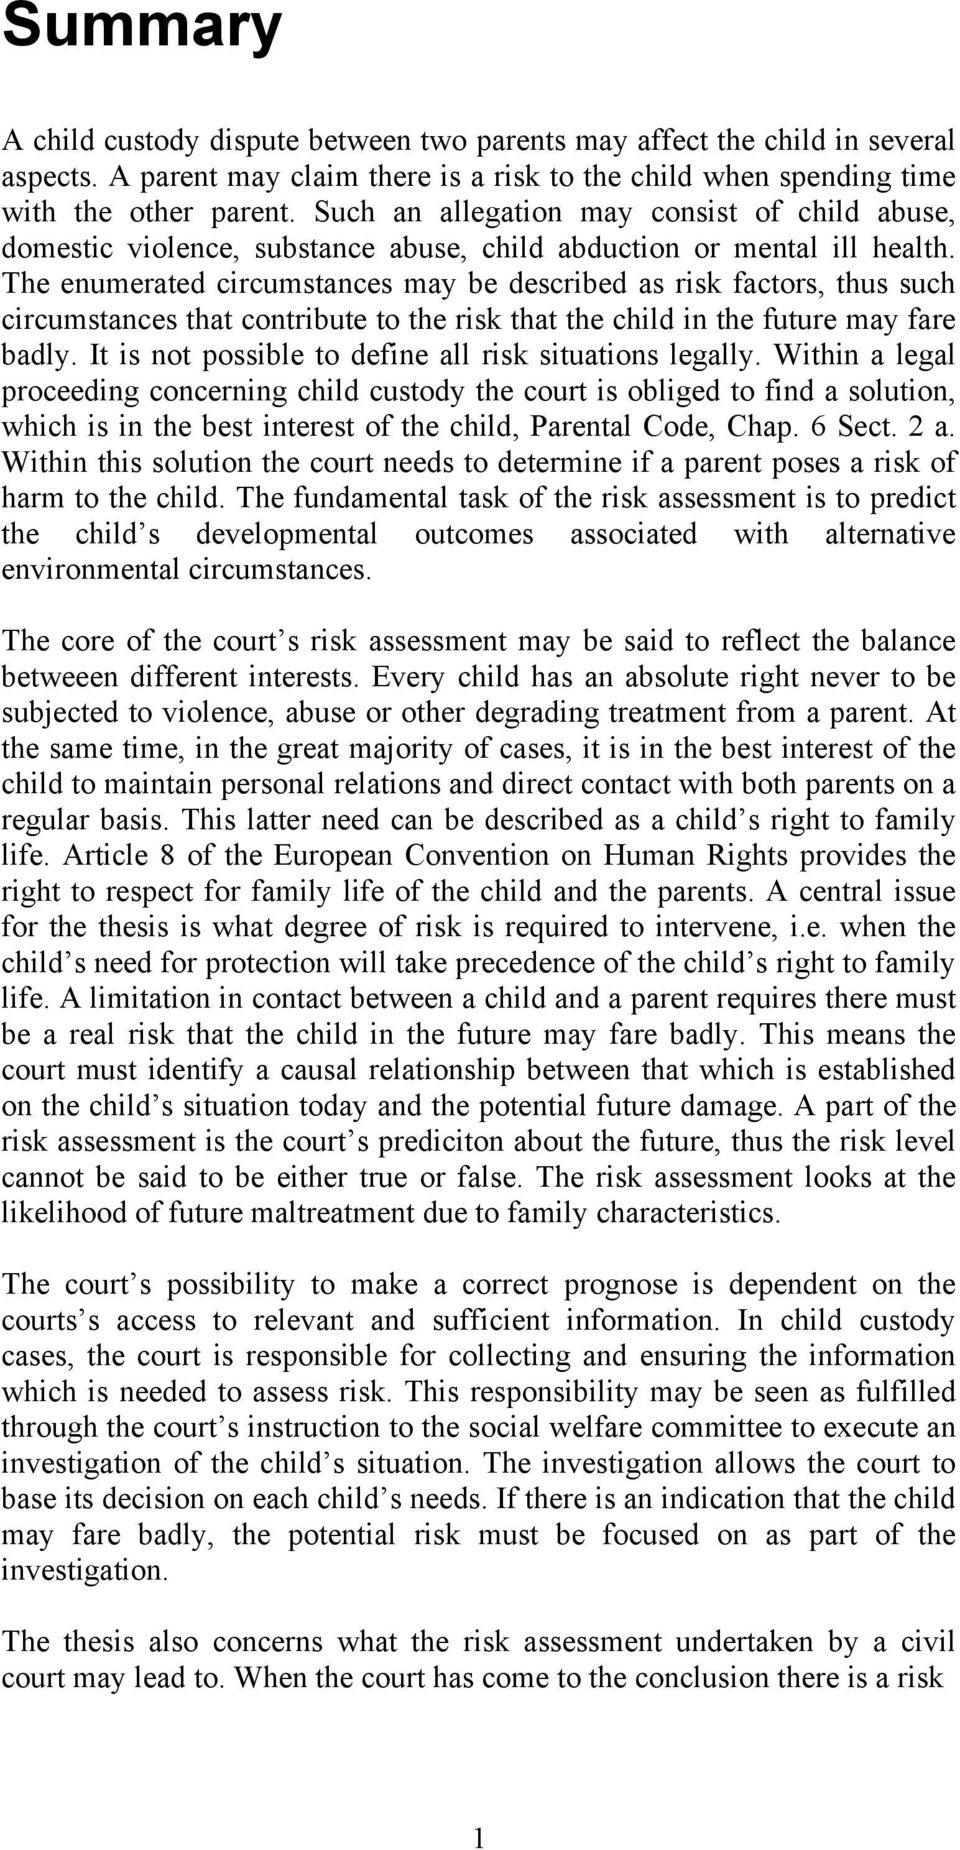 The enumerated circumstances may be described as risk factors, thus such circumstances that contribute to the risk that the child in the future may fare badly.